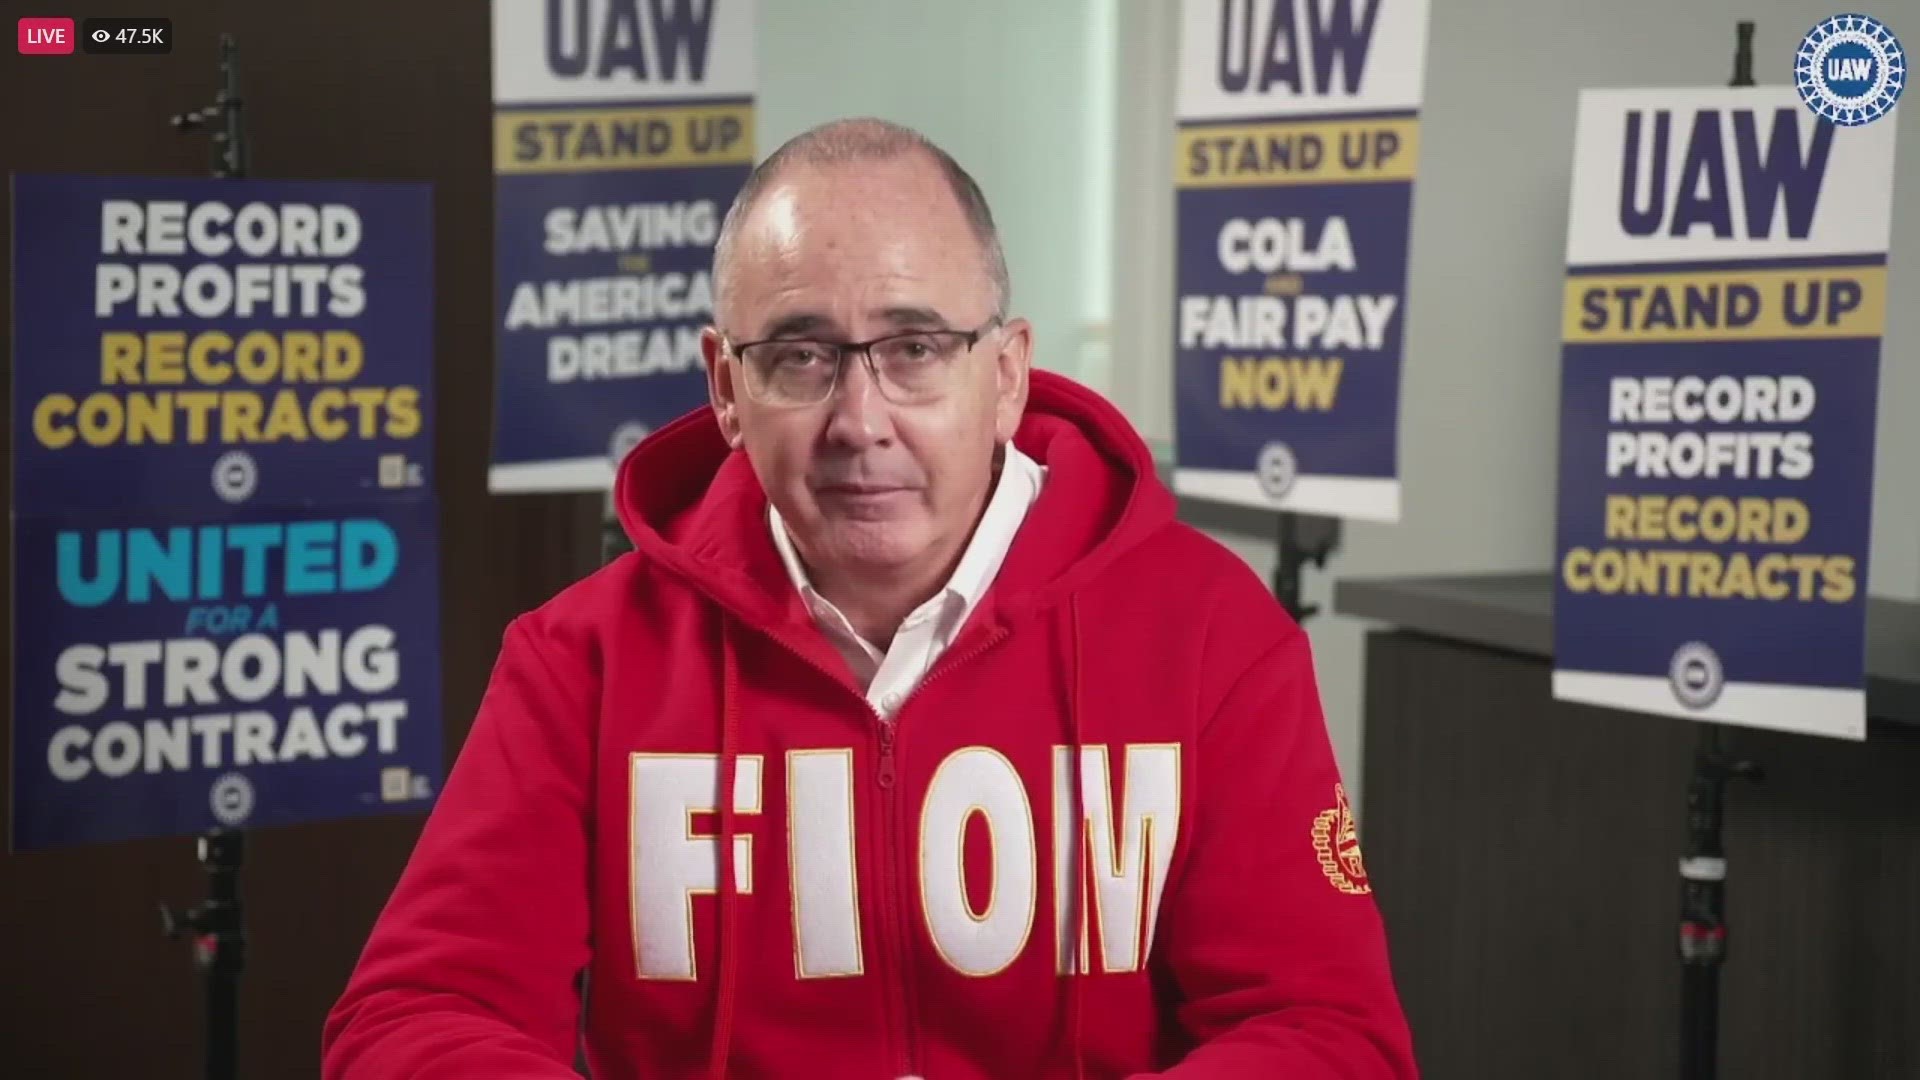 The UAW president said the companies started gaming the system, waiting until Fridays to make progress in bargaining to prevent additional walkouts.